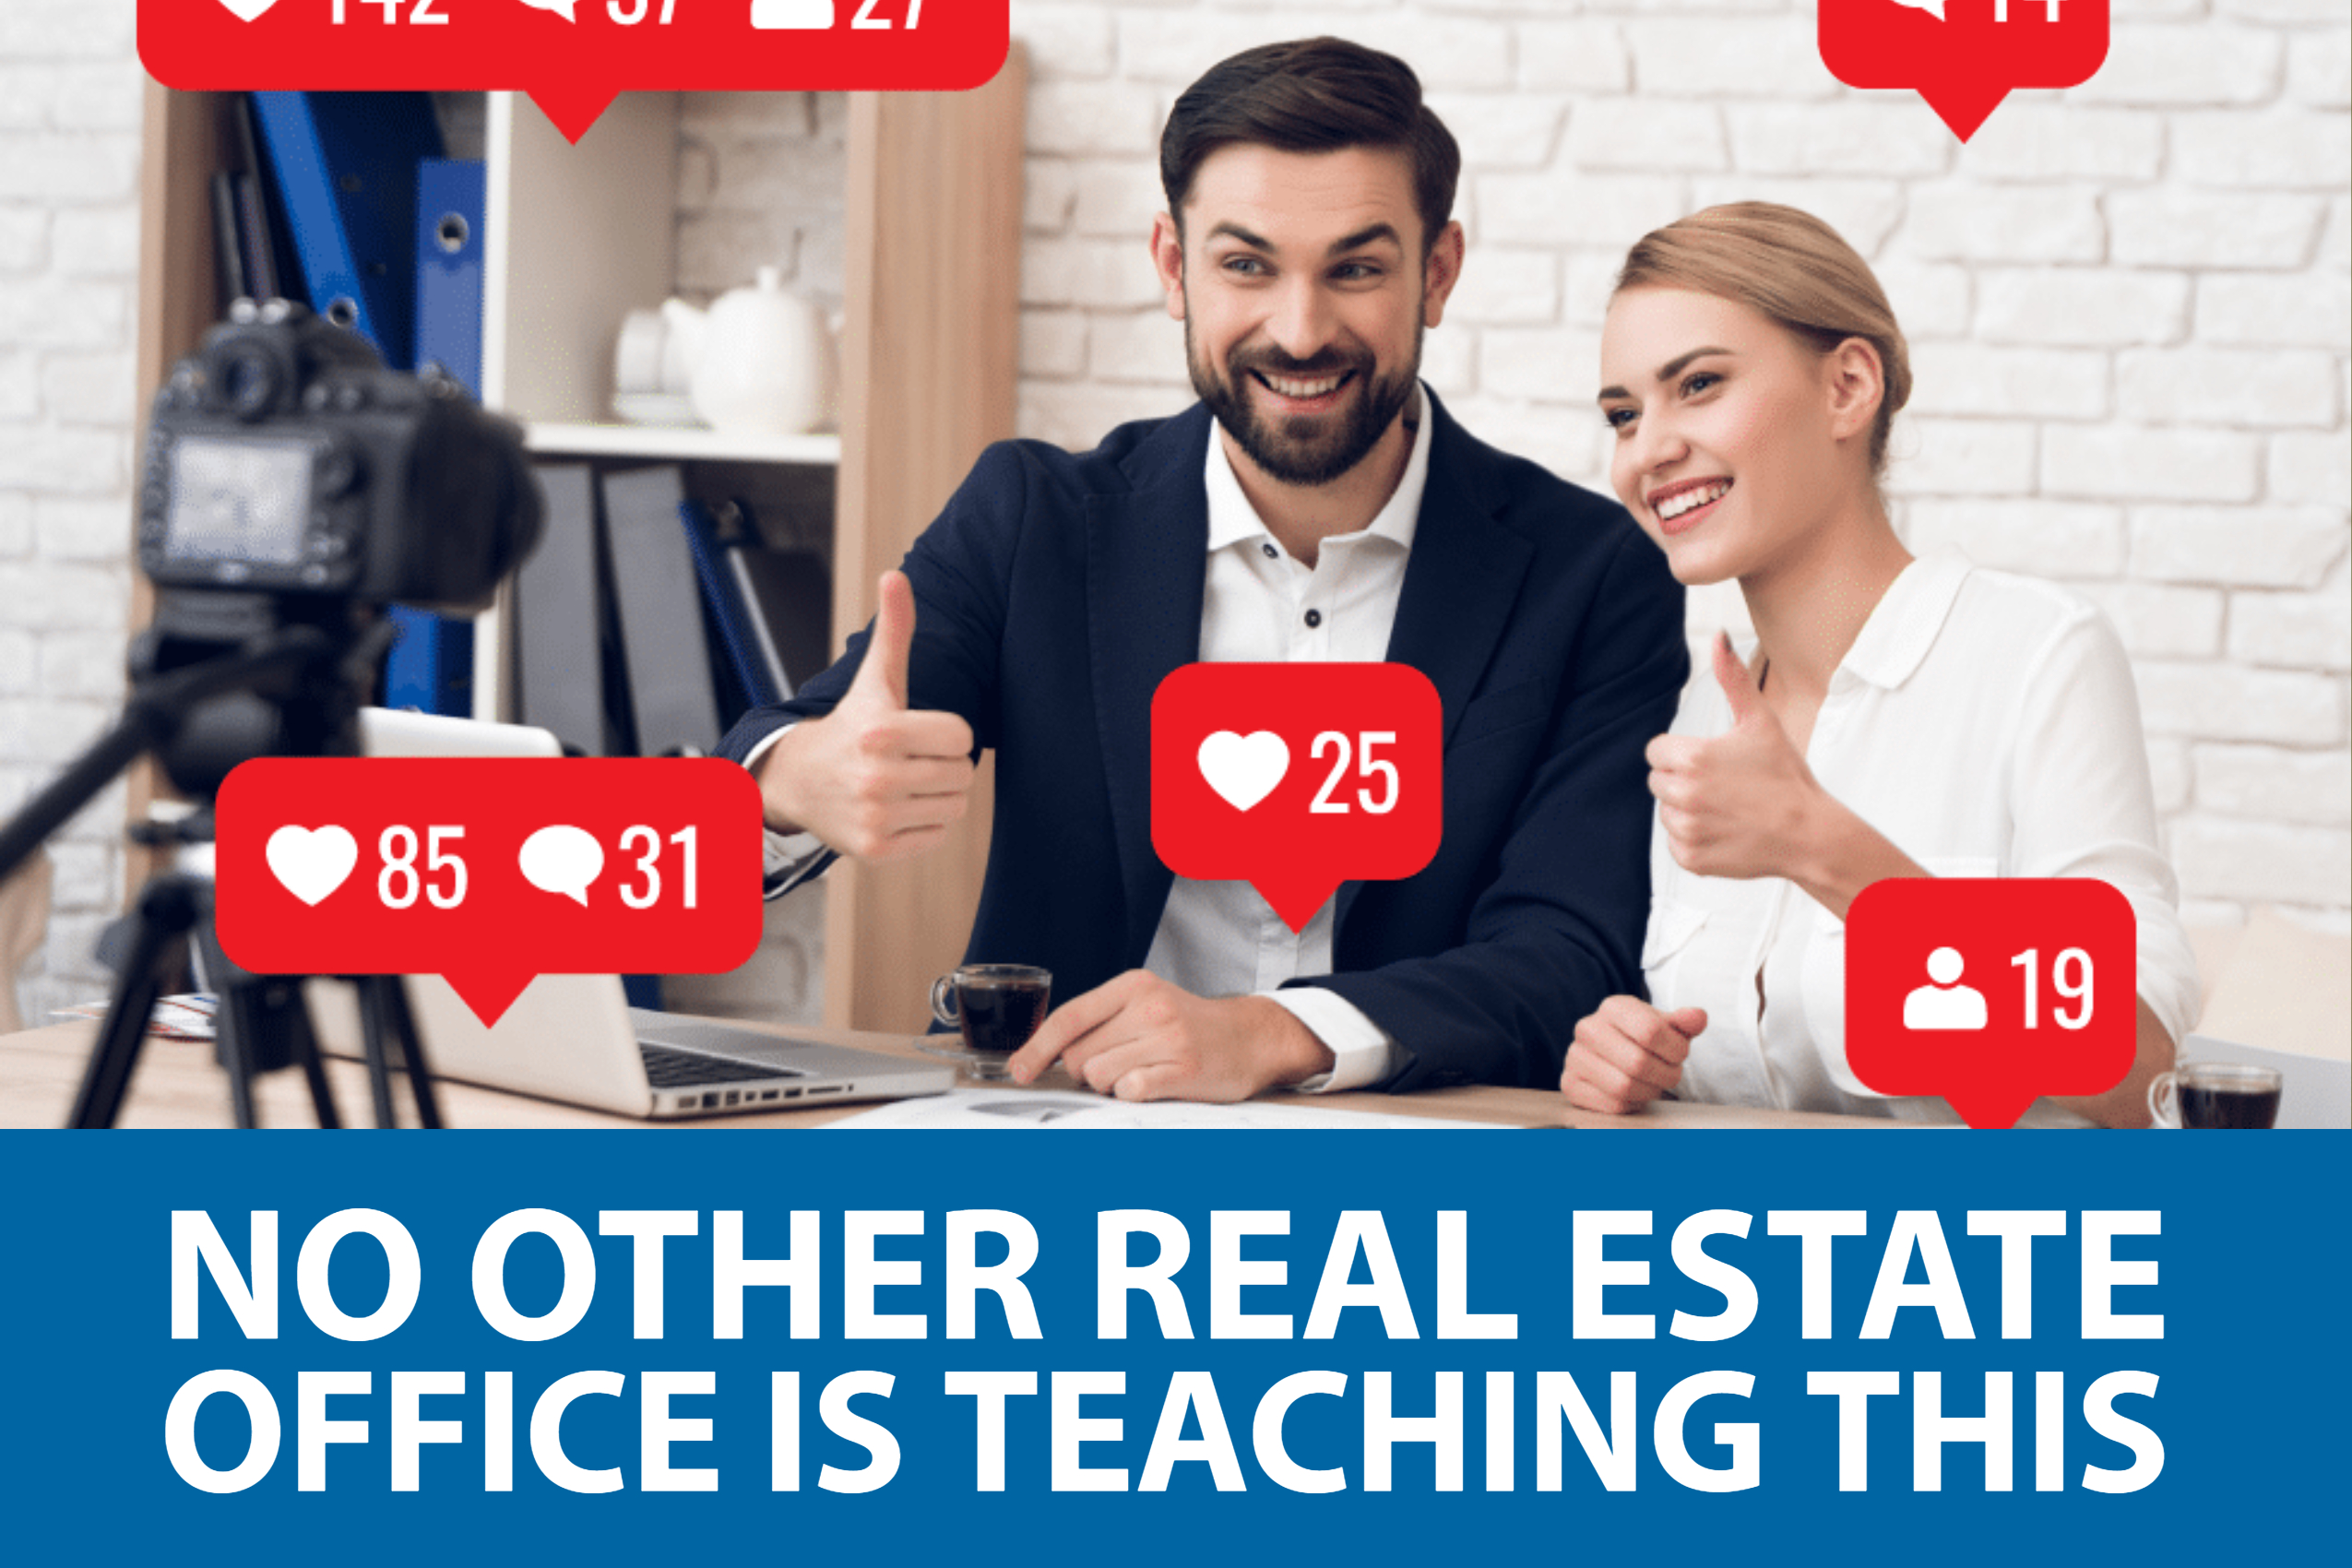 Best Real Estate Company to WOrk For Real Estate COmpany with the best commission split Real Estate Company with the best trianing for new agents 